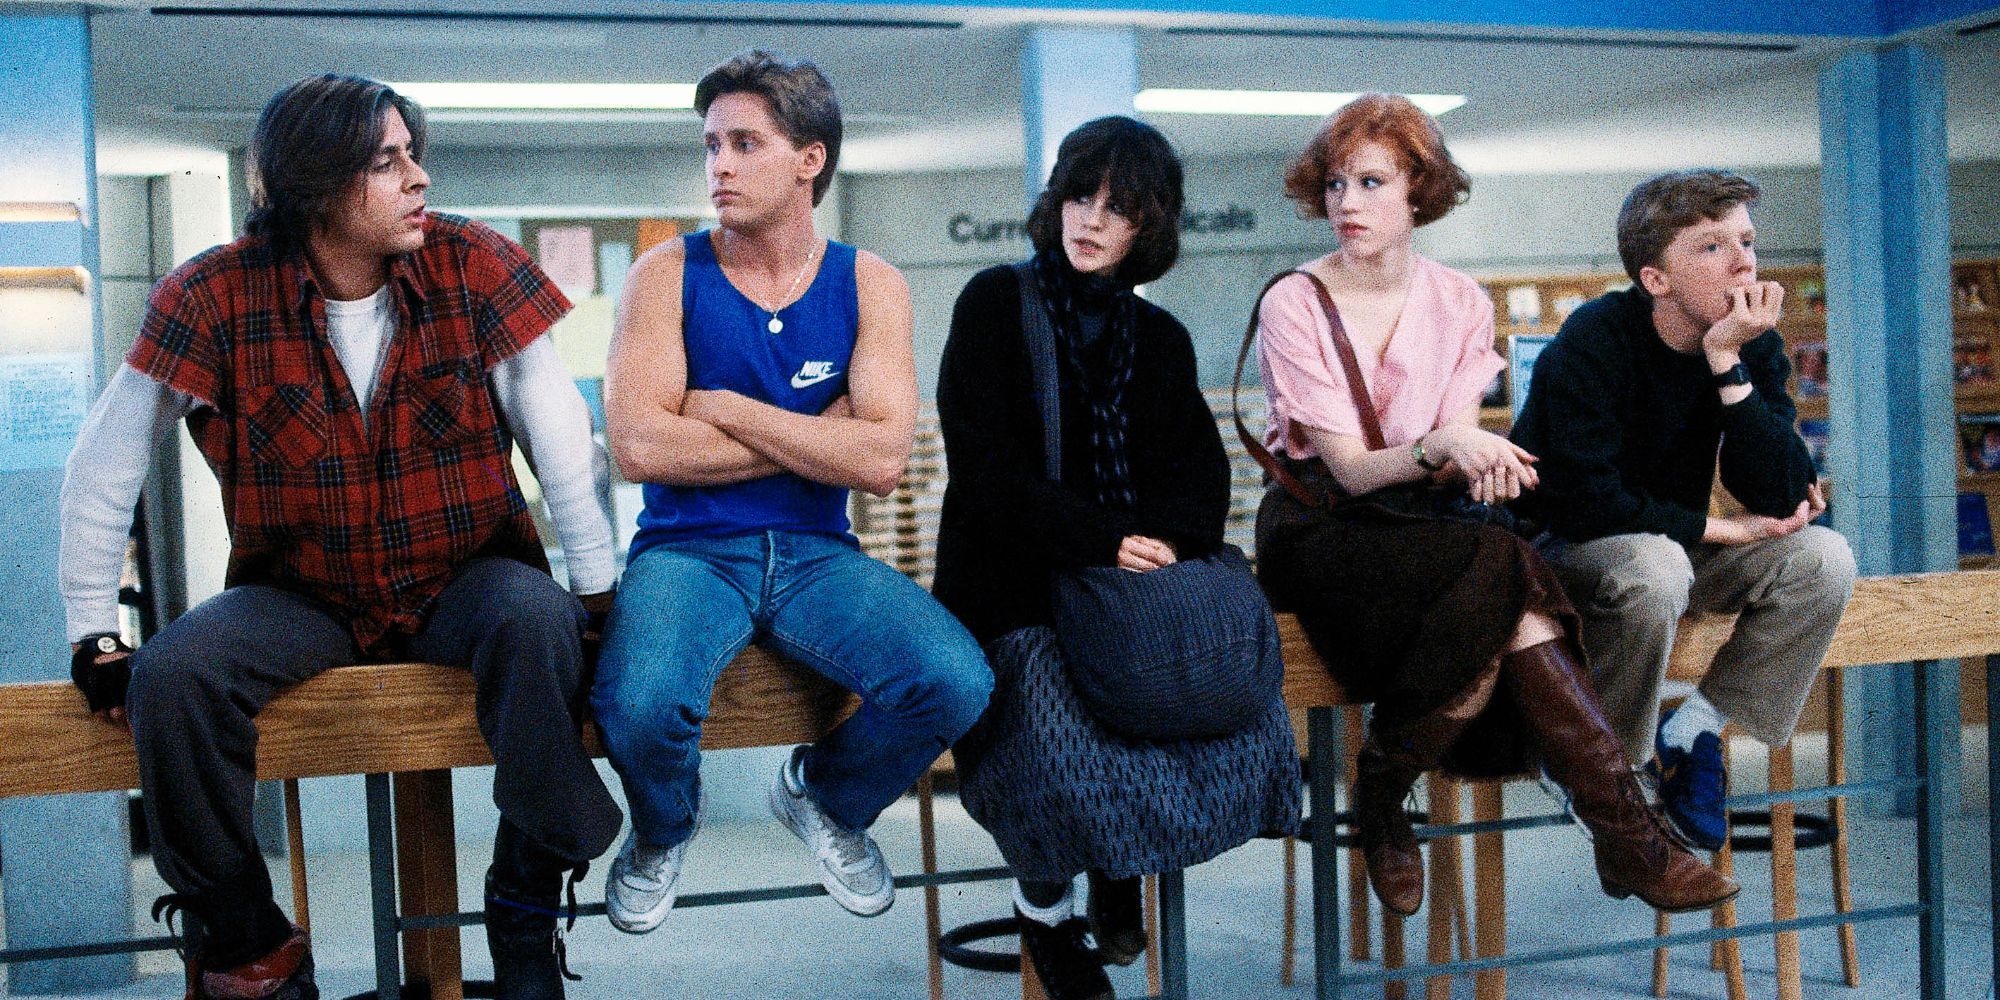 Five students waiting in detention in The Breakfast Club